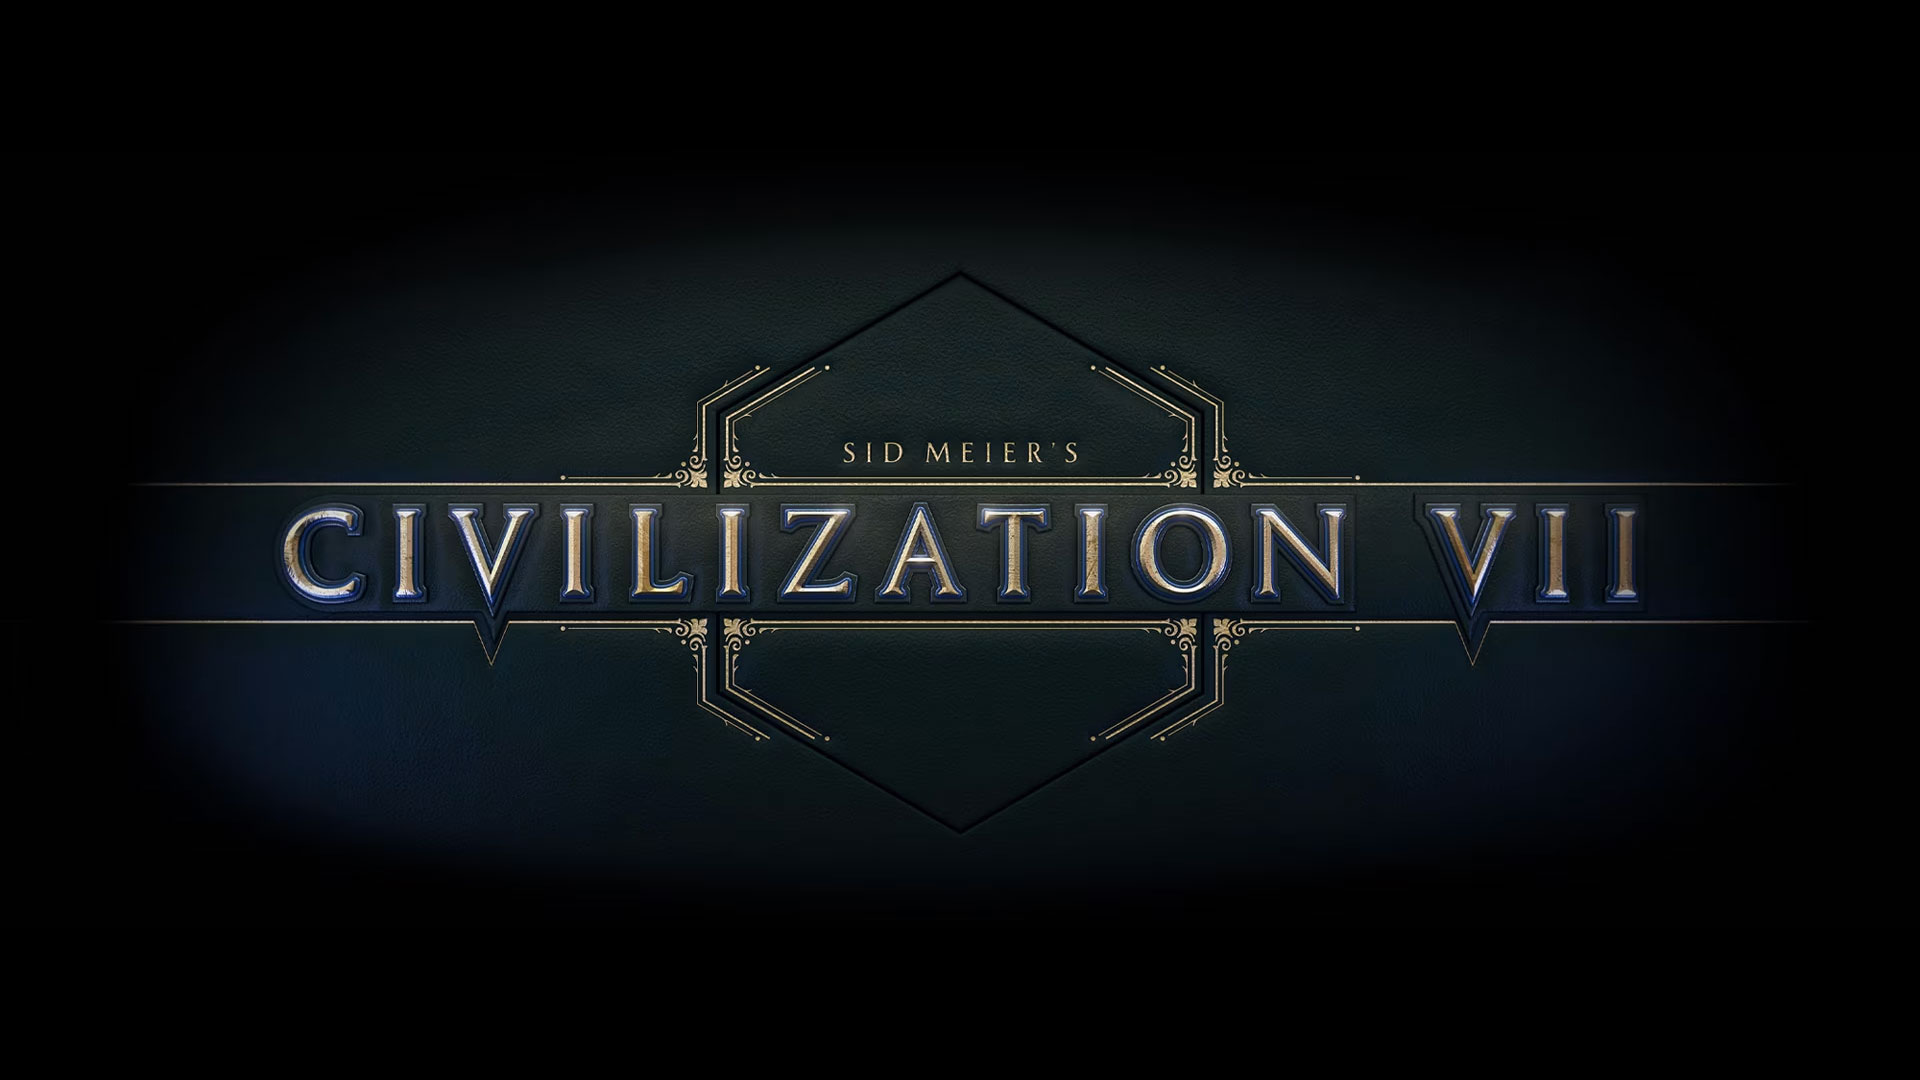 The full reveal of Civilization VII is coming in August